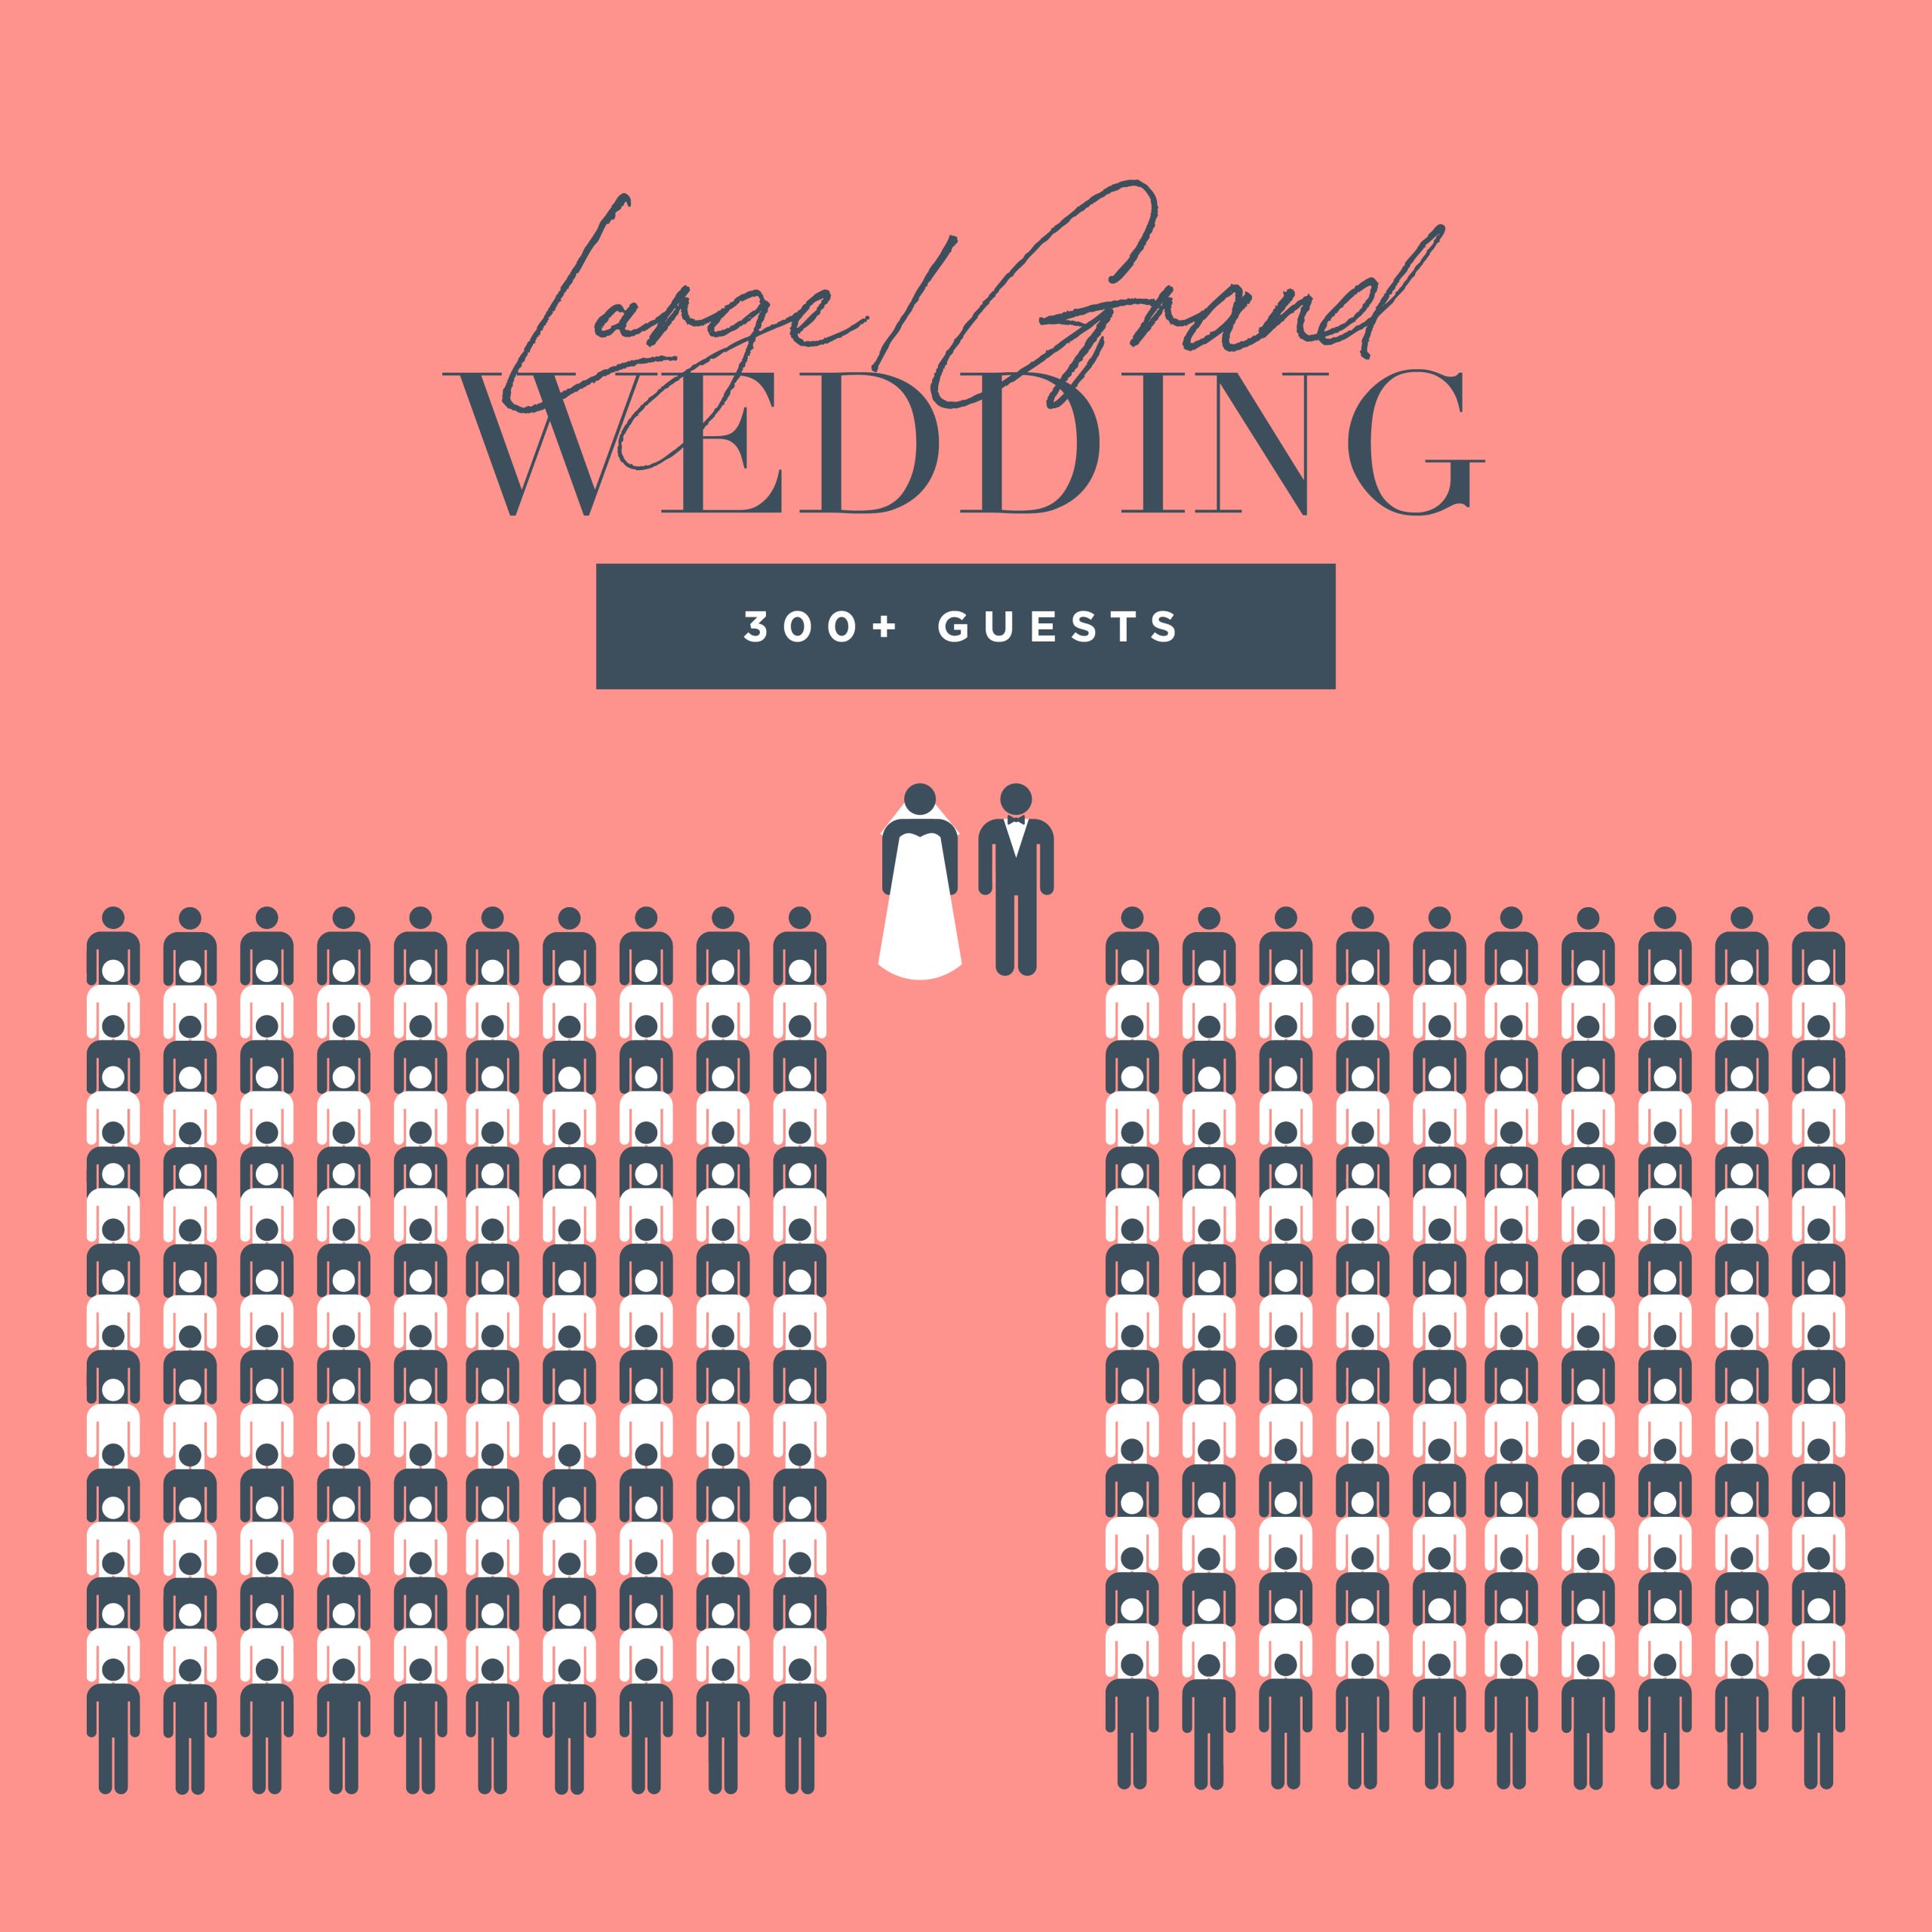 large wedding guest count 